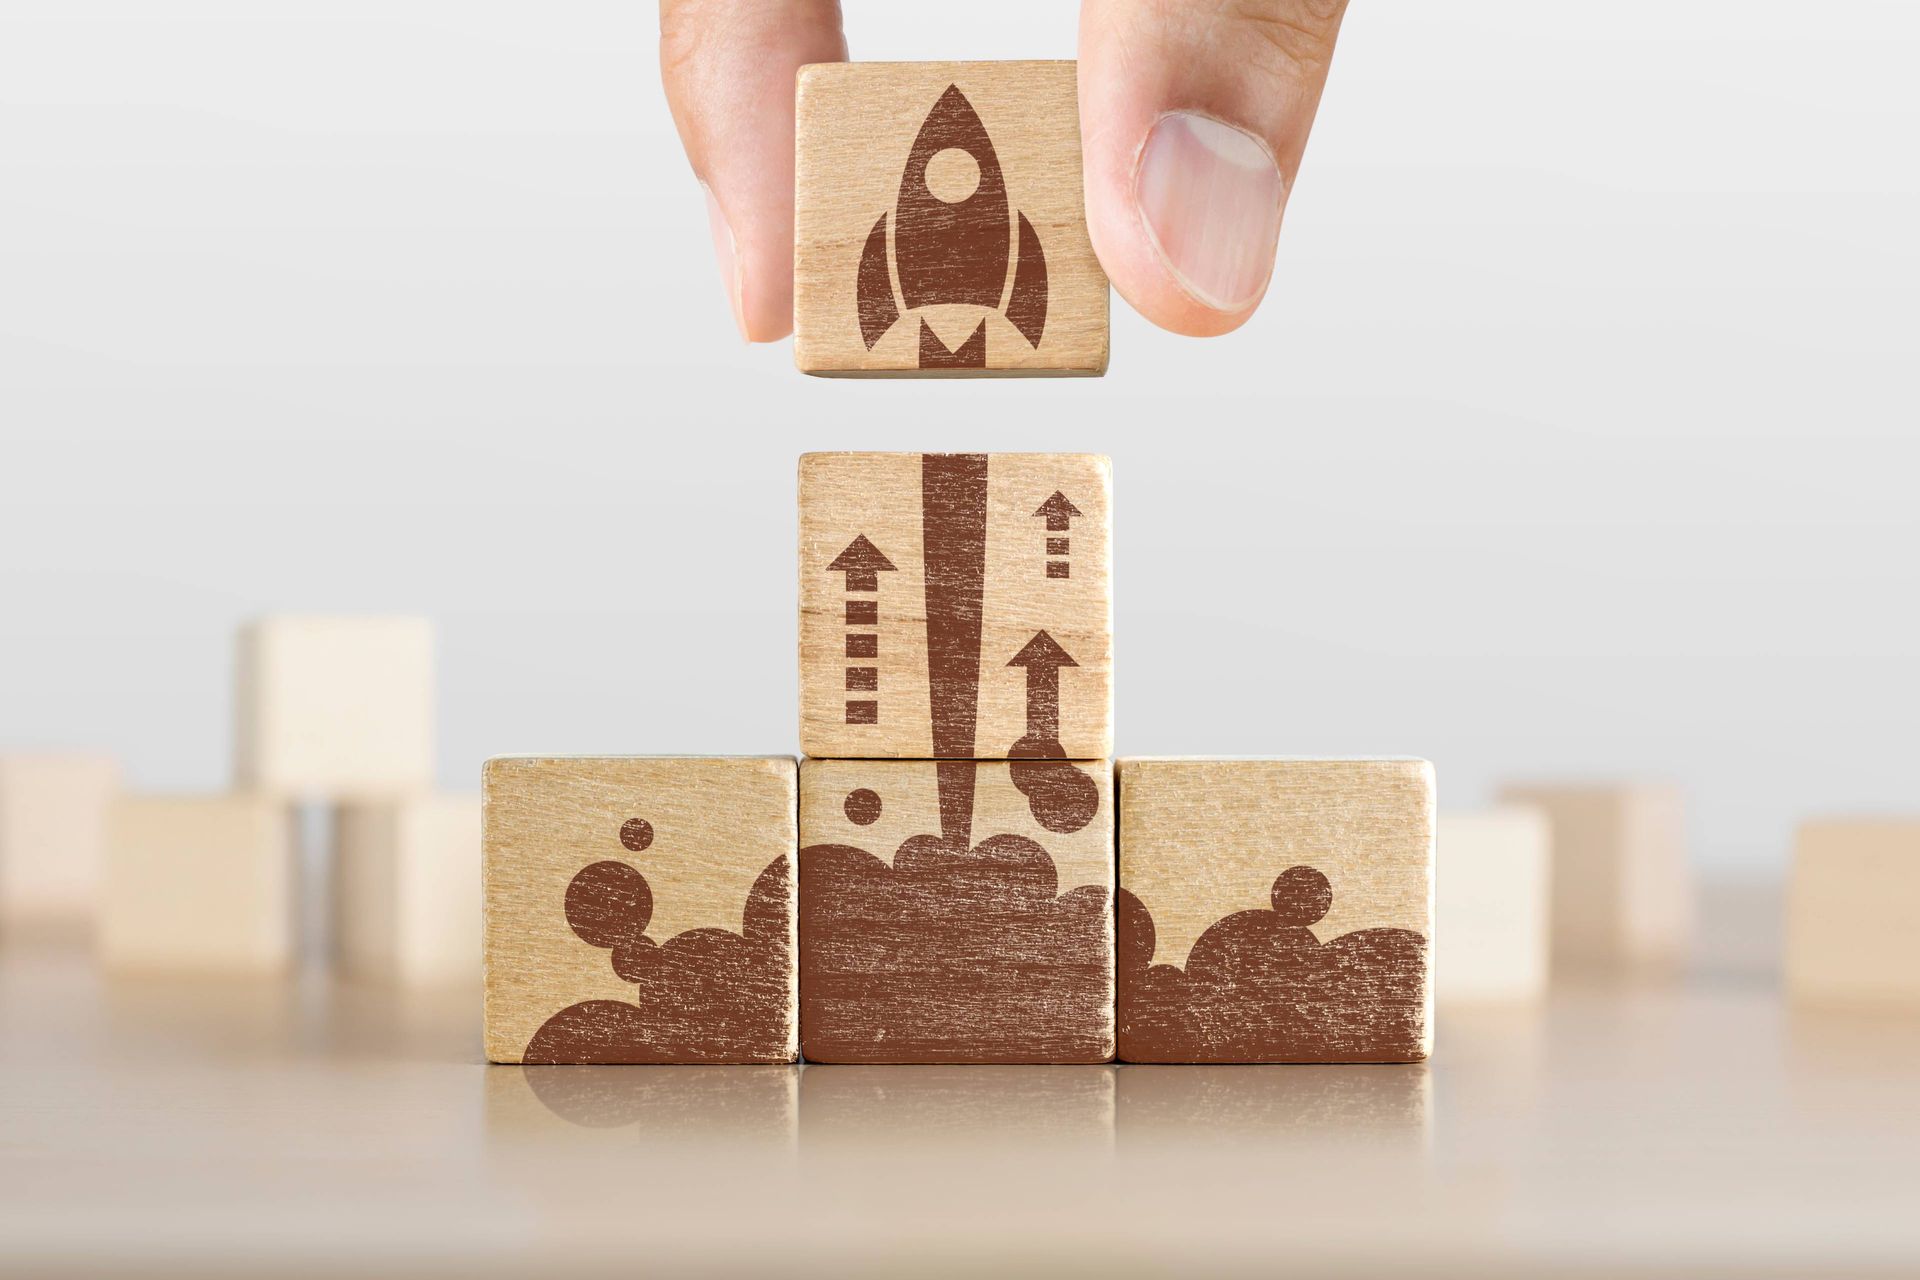 Image of wooden blocks with a rocket design assembled to represent a product launch